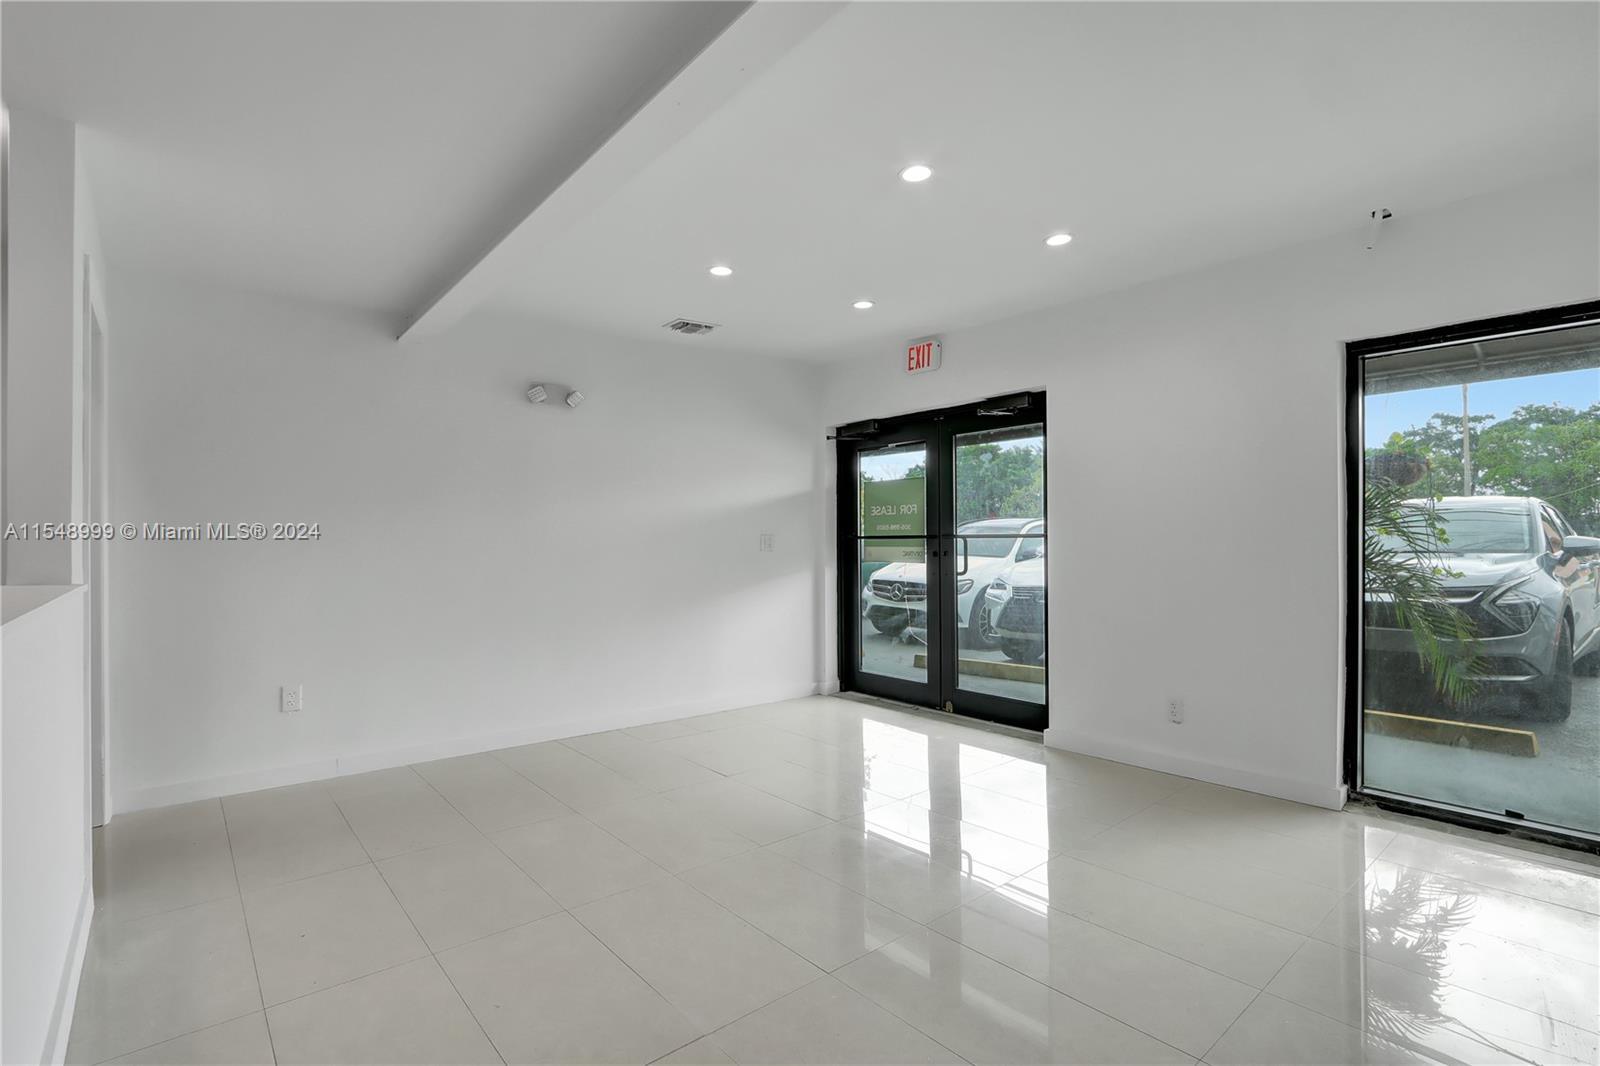 Photo of 7000 NW 2nd Ave #7010 in Miami, FL